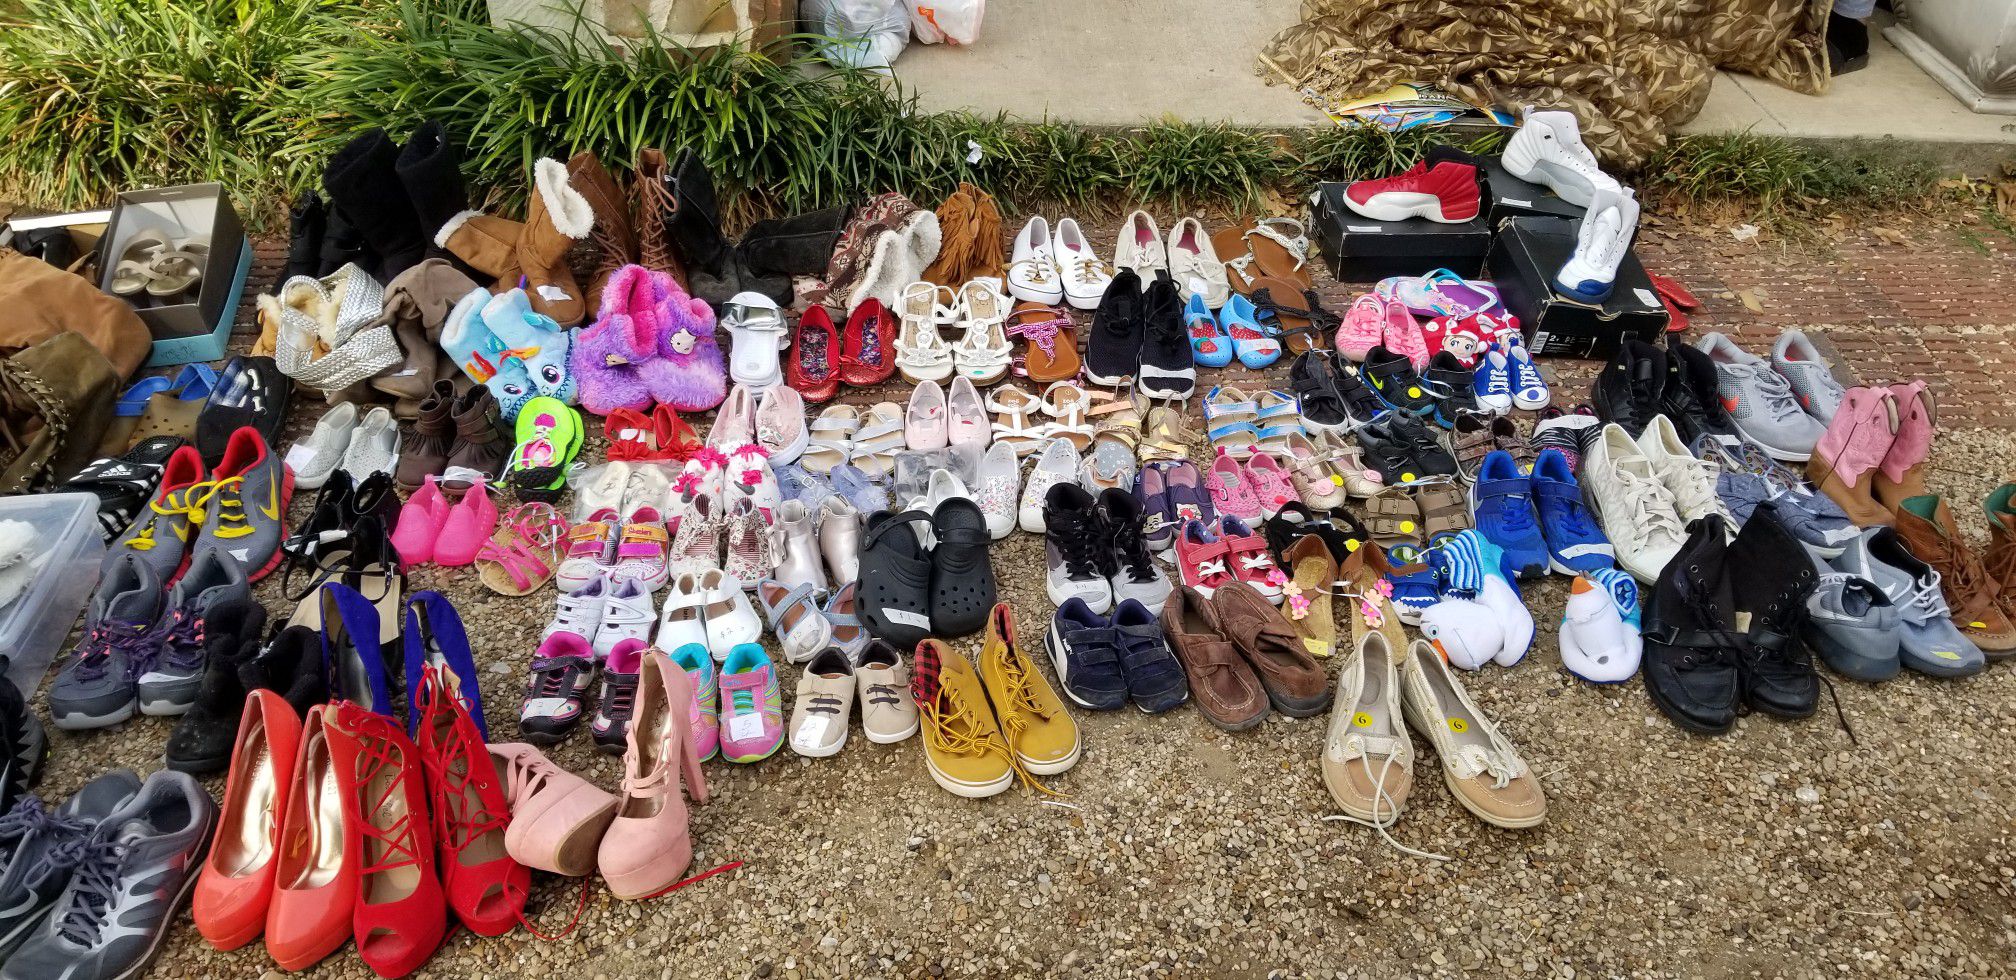 Clothes,toys,shoes and more